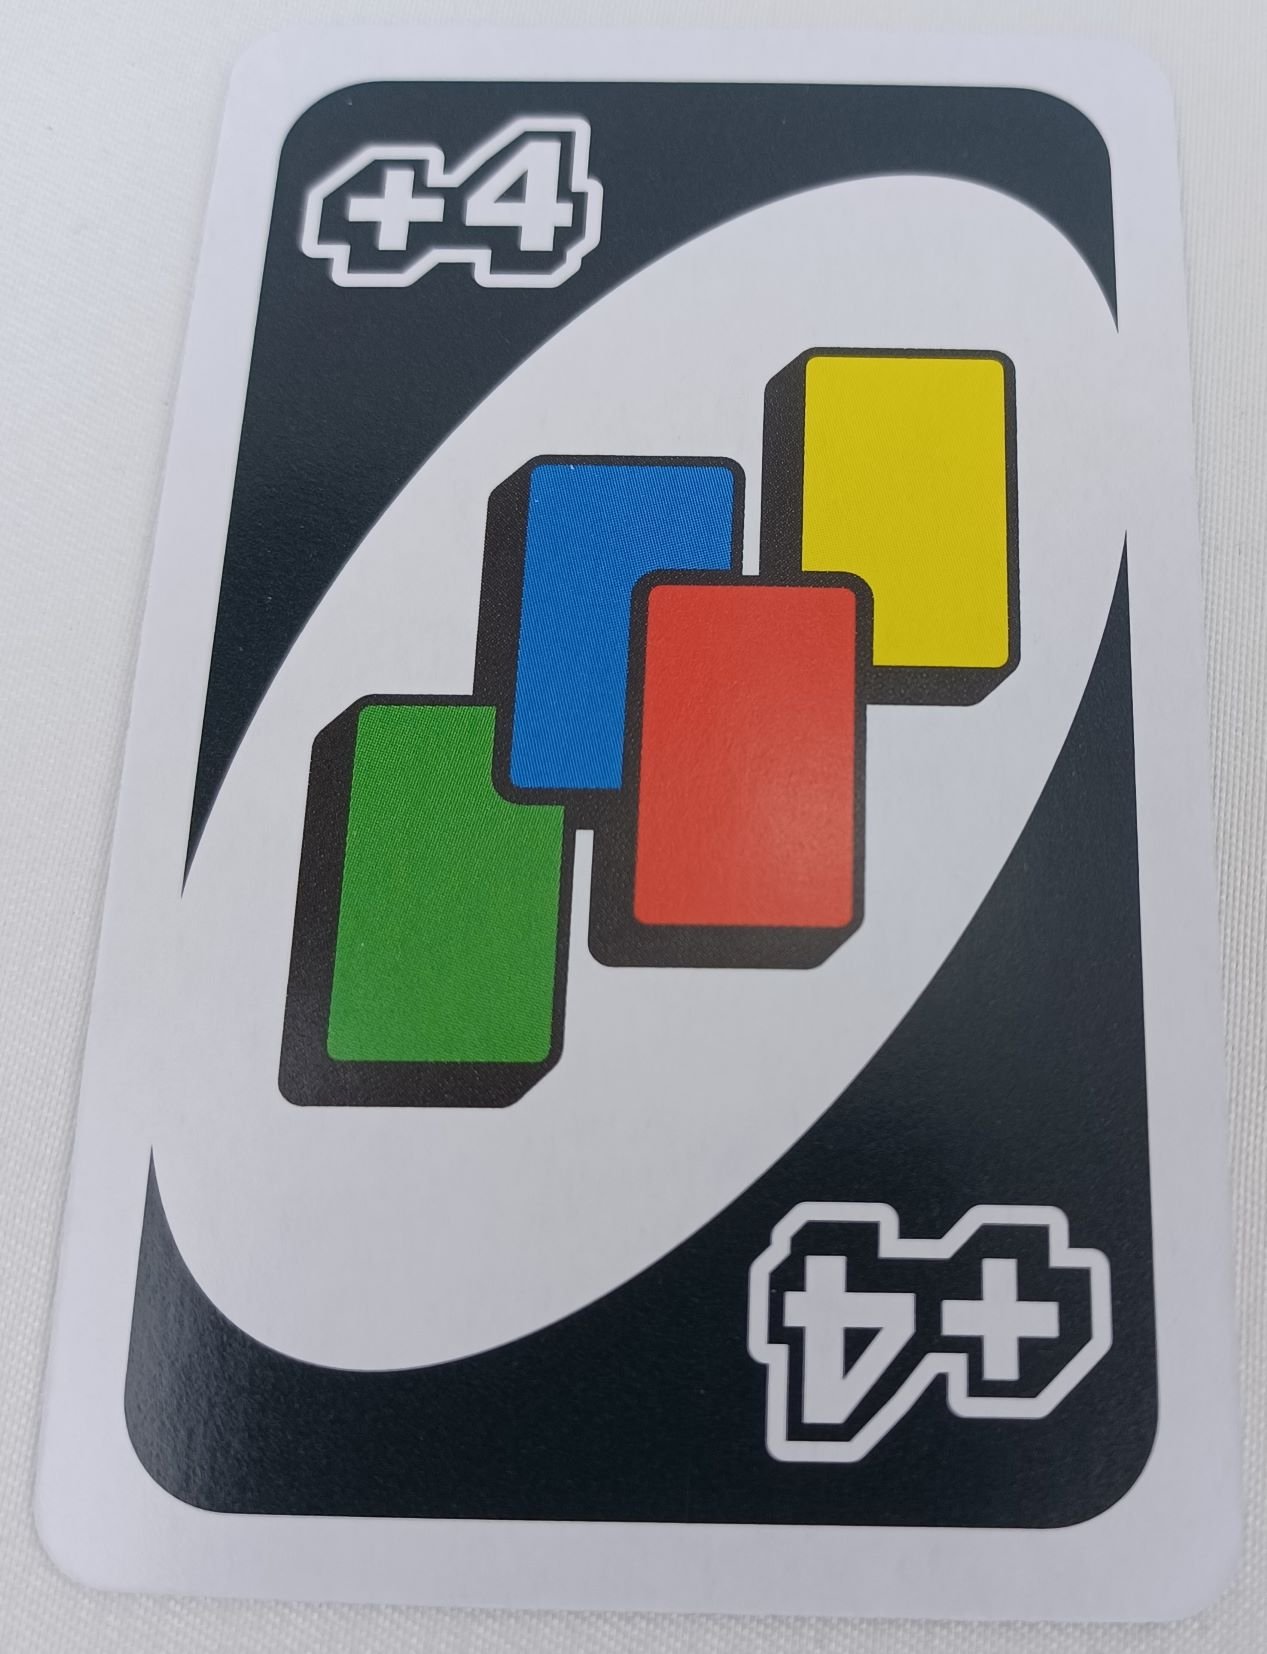 UNO - Rule of the Day: Normally when you don't have a card in your hand to  play, you take one card from the Draw Pile and that's your turn. But with